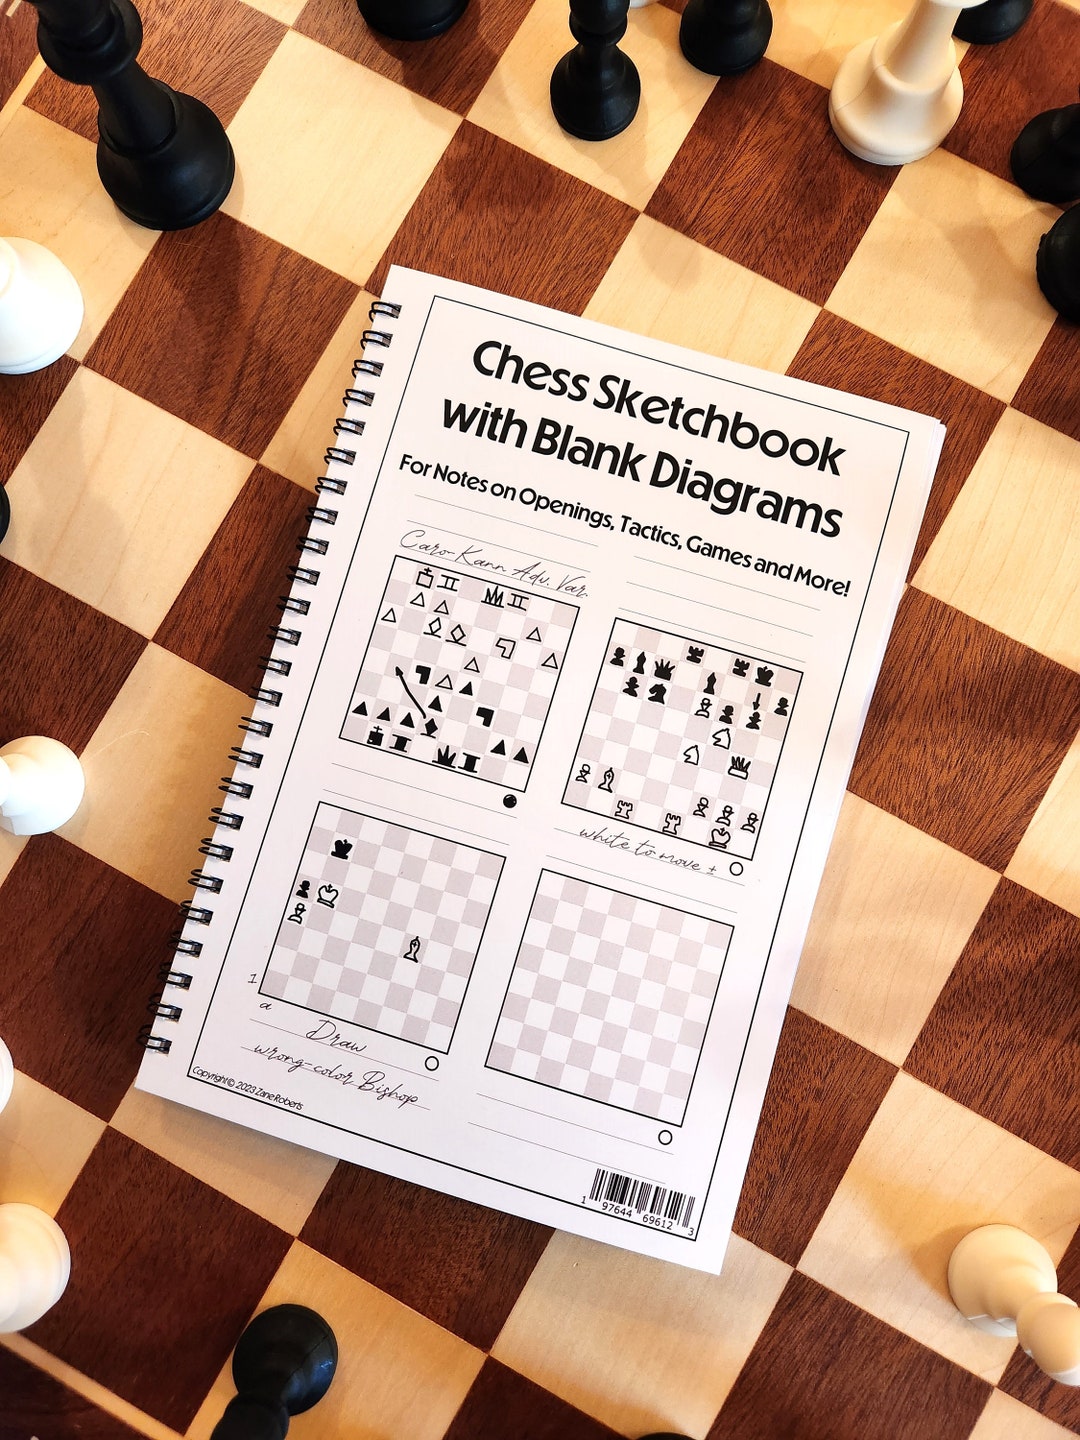 How to snap chess diagrams from PDFs? 